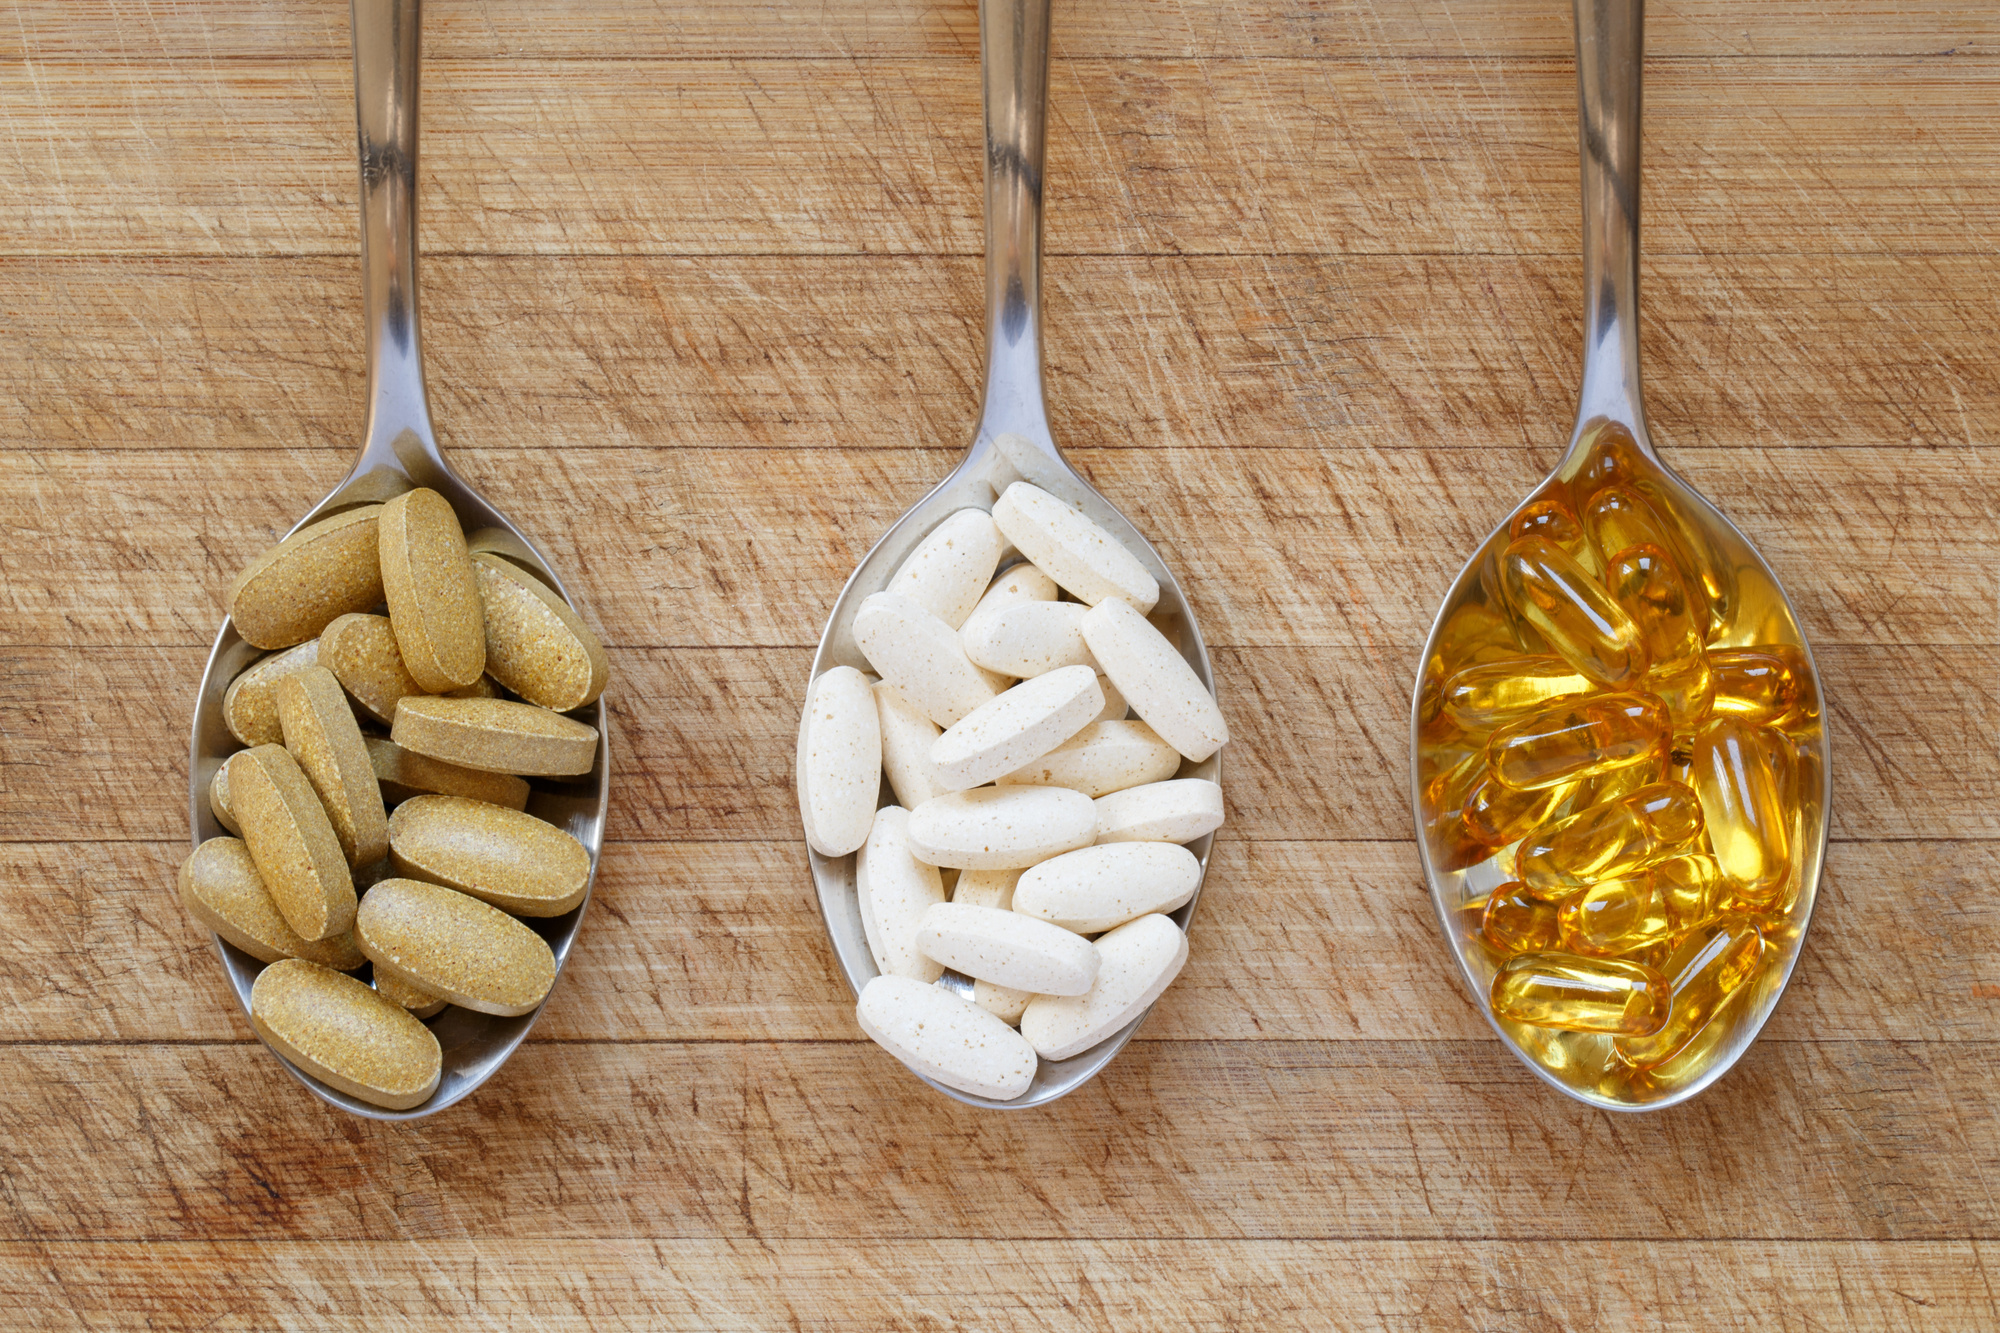 Vitamin supplement store near me: Do you want to know how to choose the right supplements for you? Read on to learn how to make the right choice.